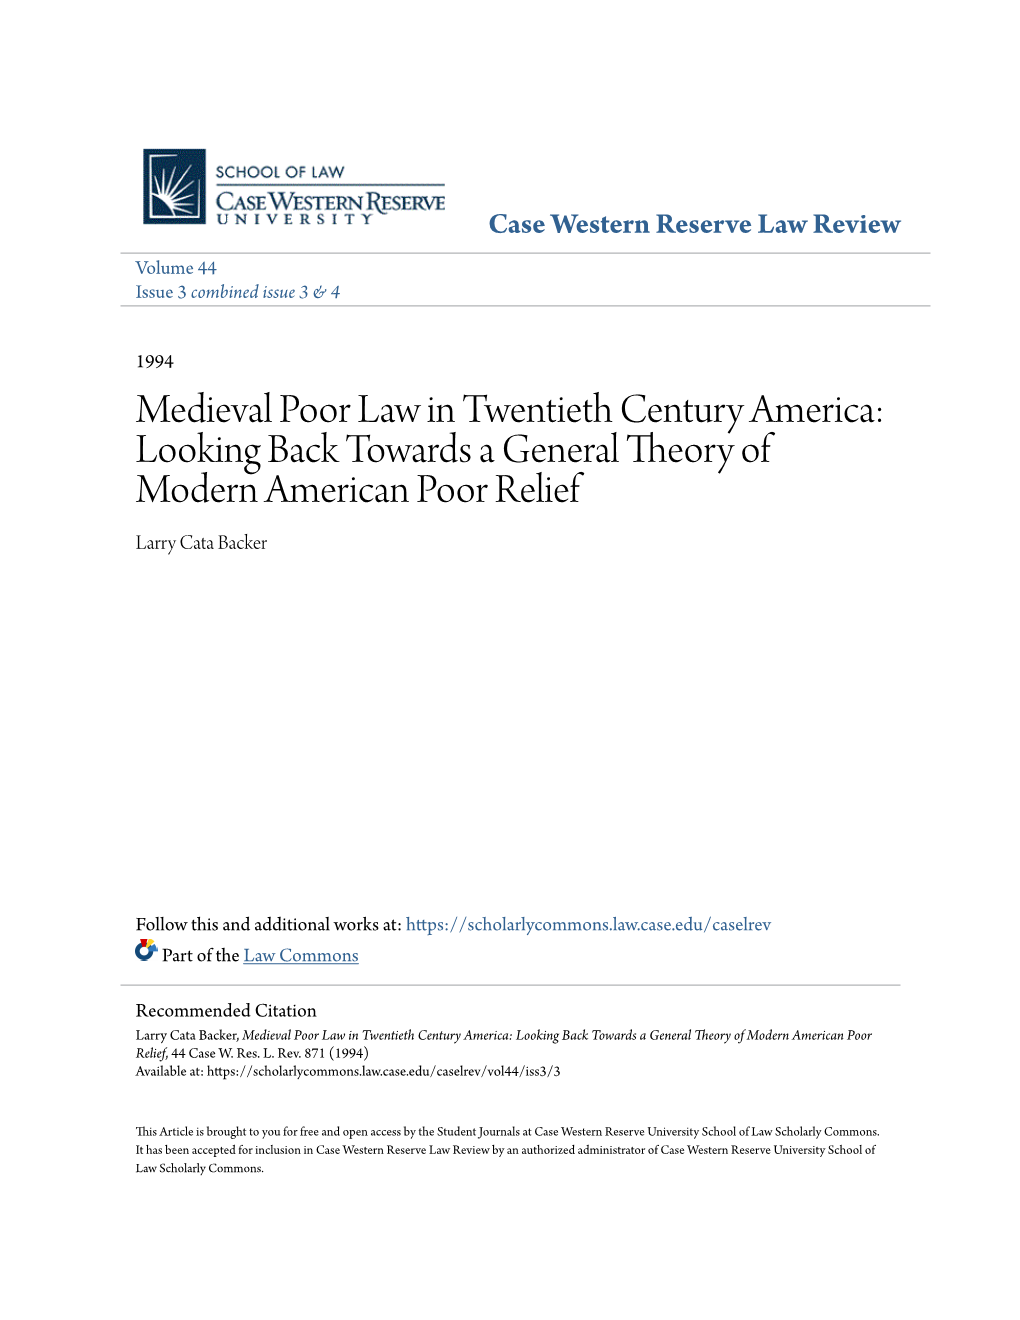 Medieval Poor Law in Twentieth Century America: Looking Back Towards a General Theory of Modern American Poor Relief Larry Cata Backer